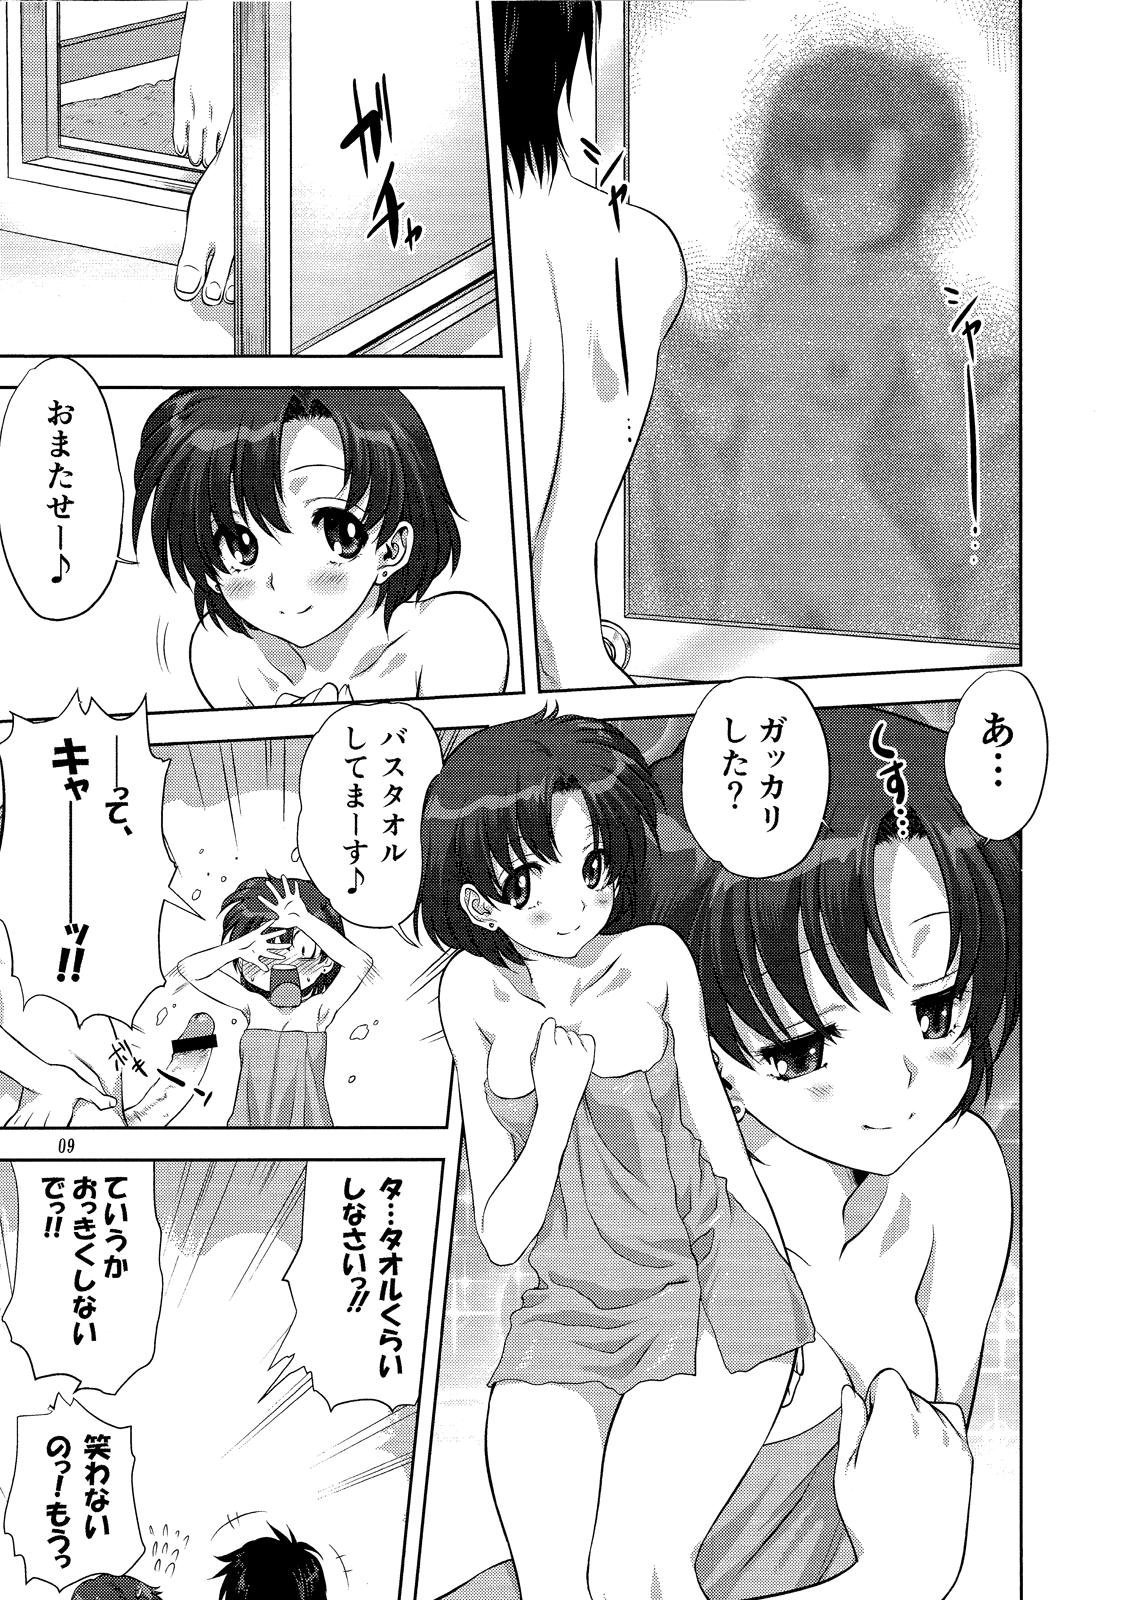 Glasses Ami-chan to Issho - Sailor moon Taiwan - Page 8